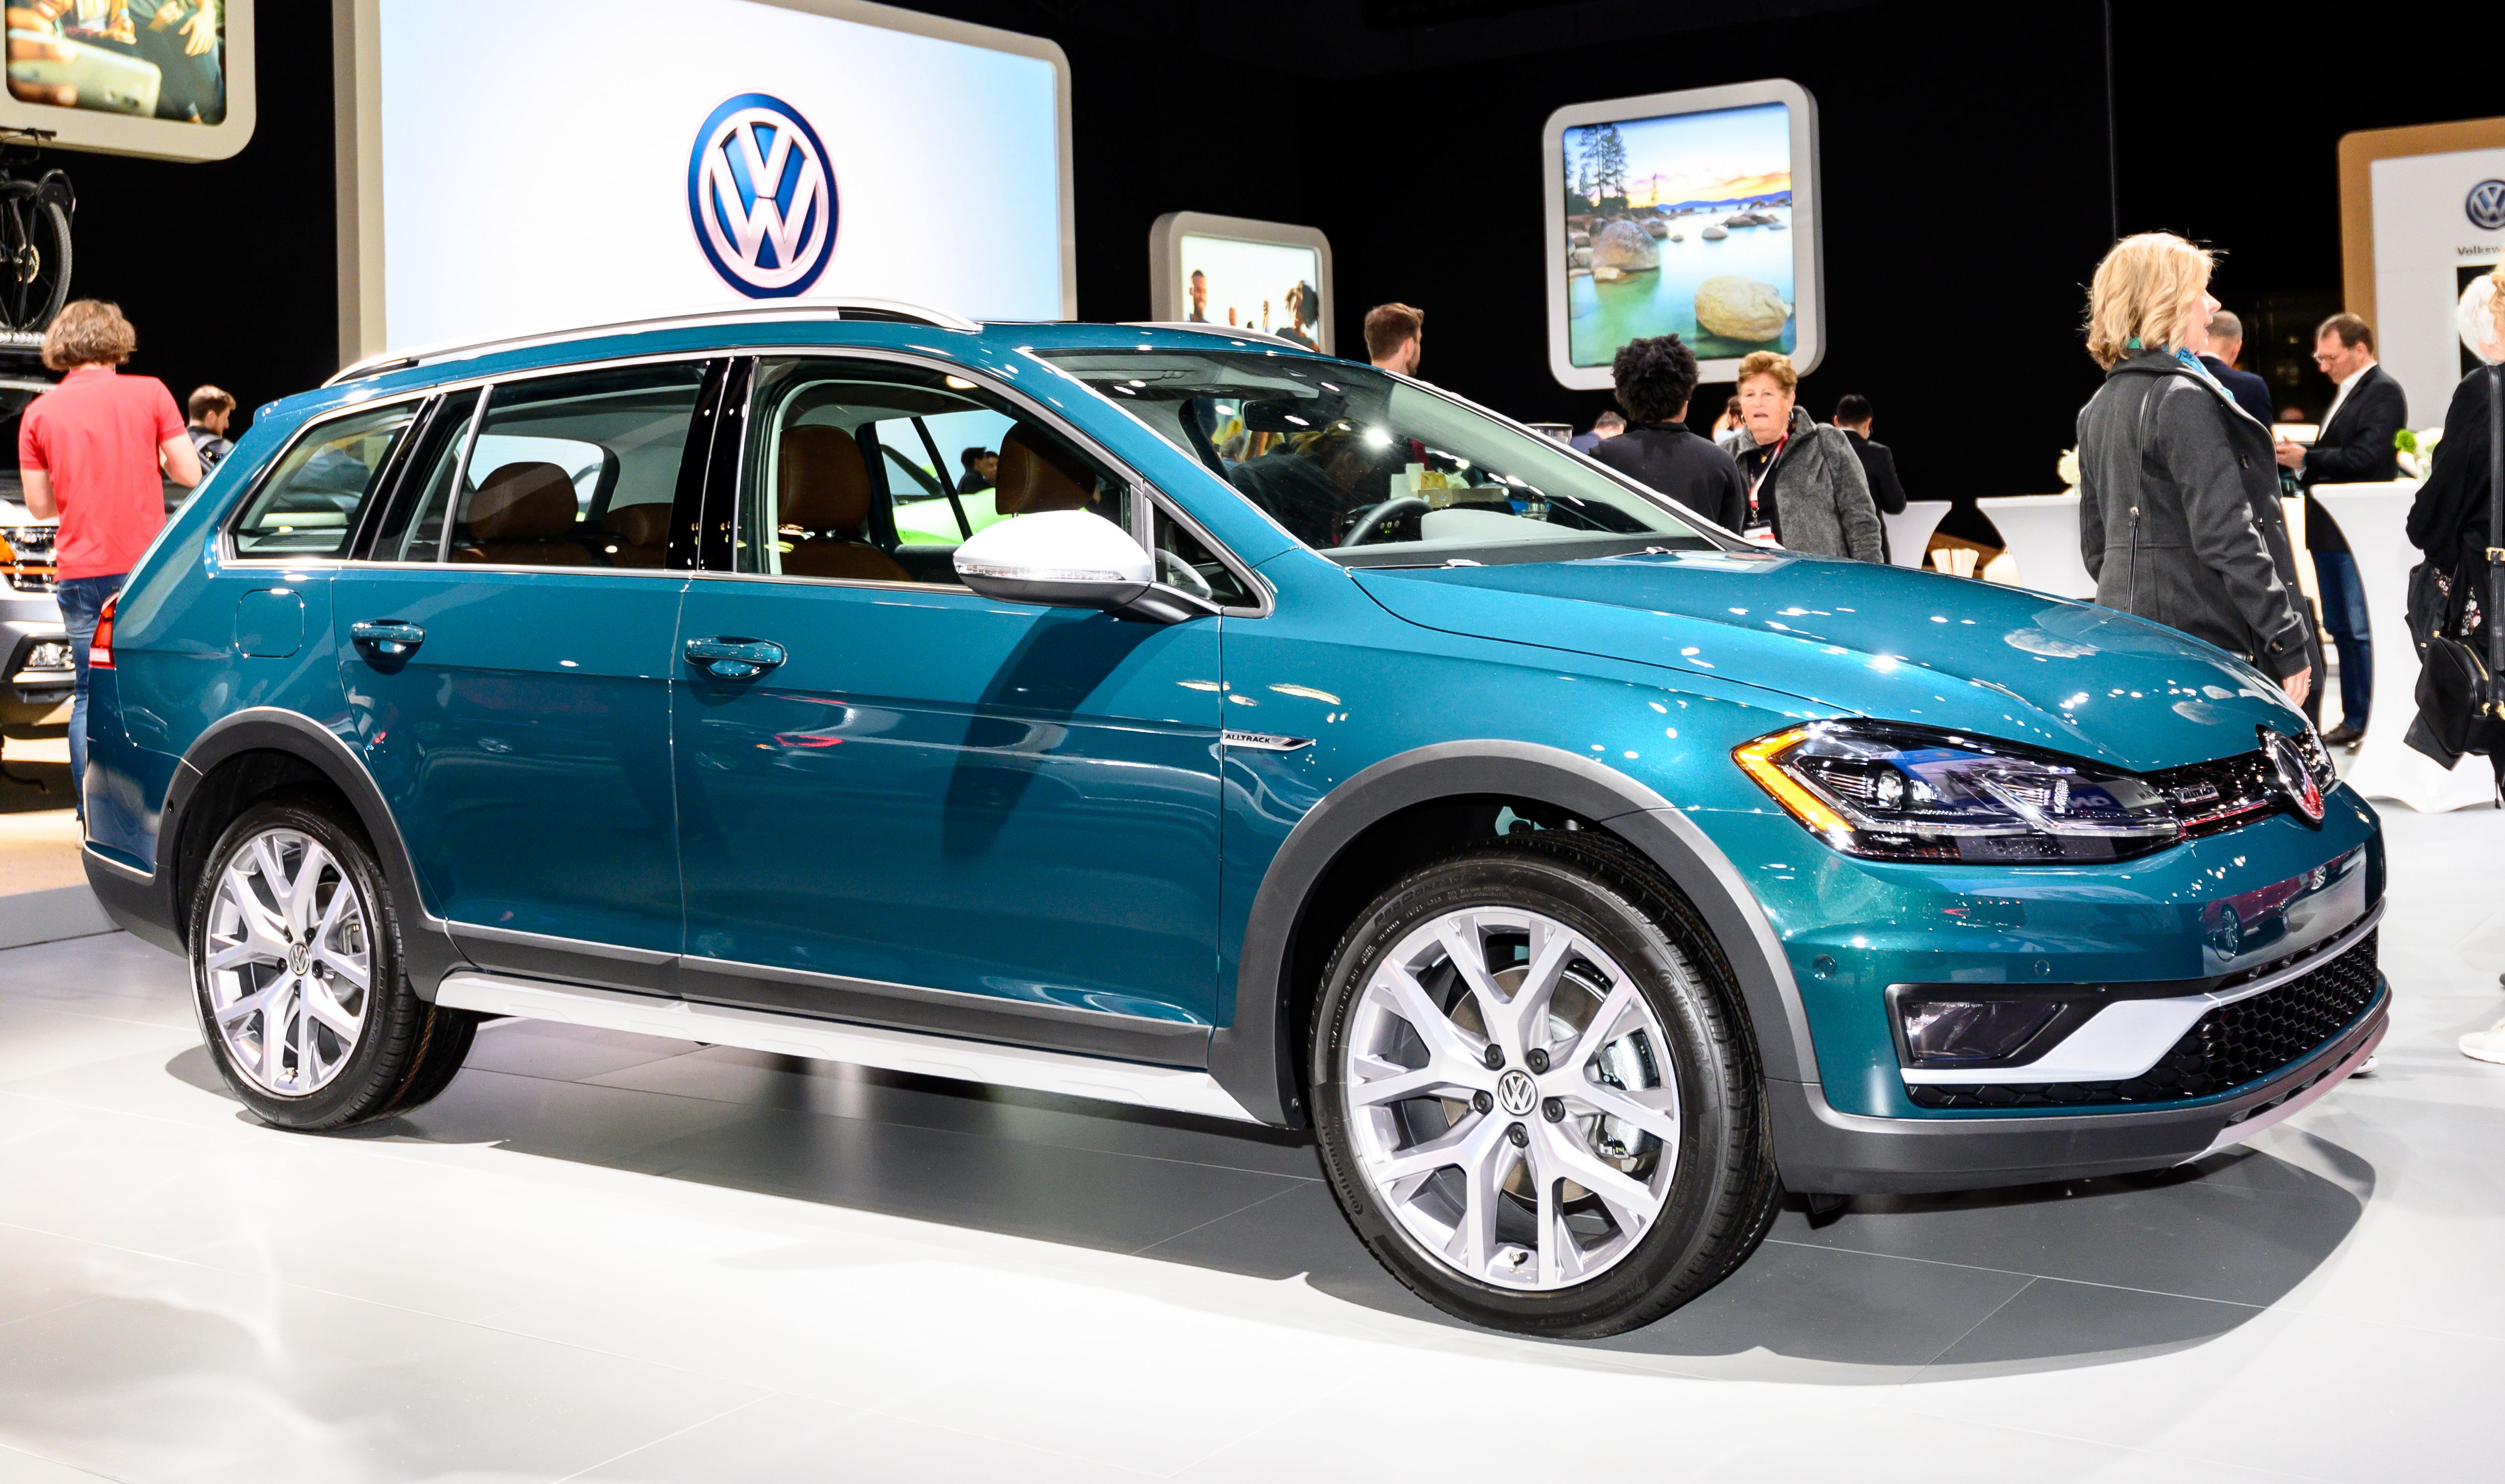 VW pounds another nail in the coffin of the station wagon